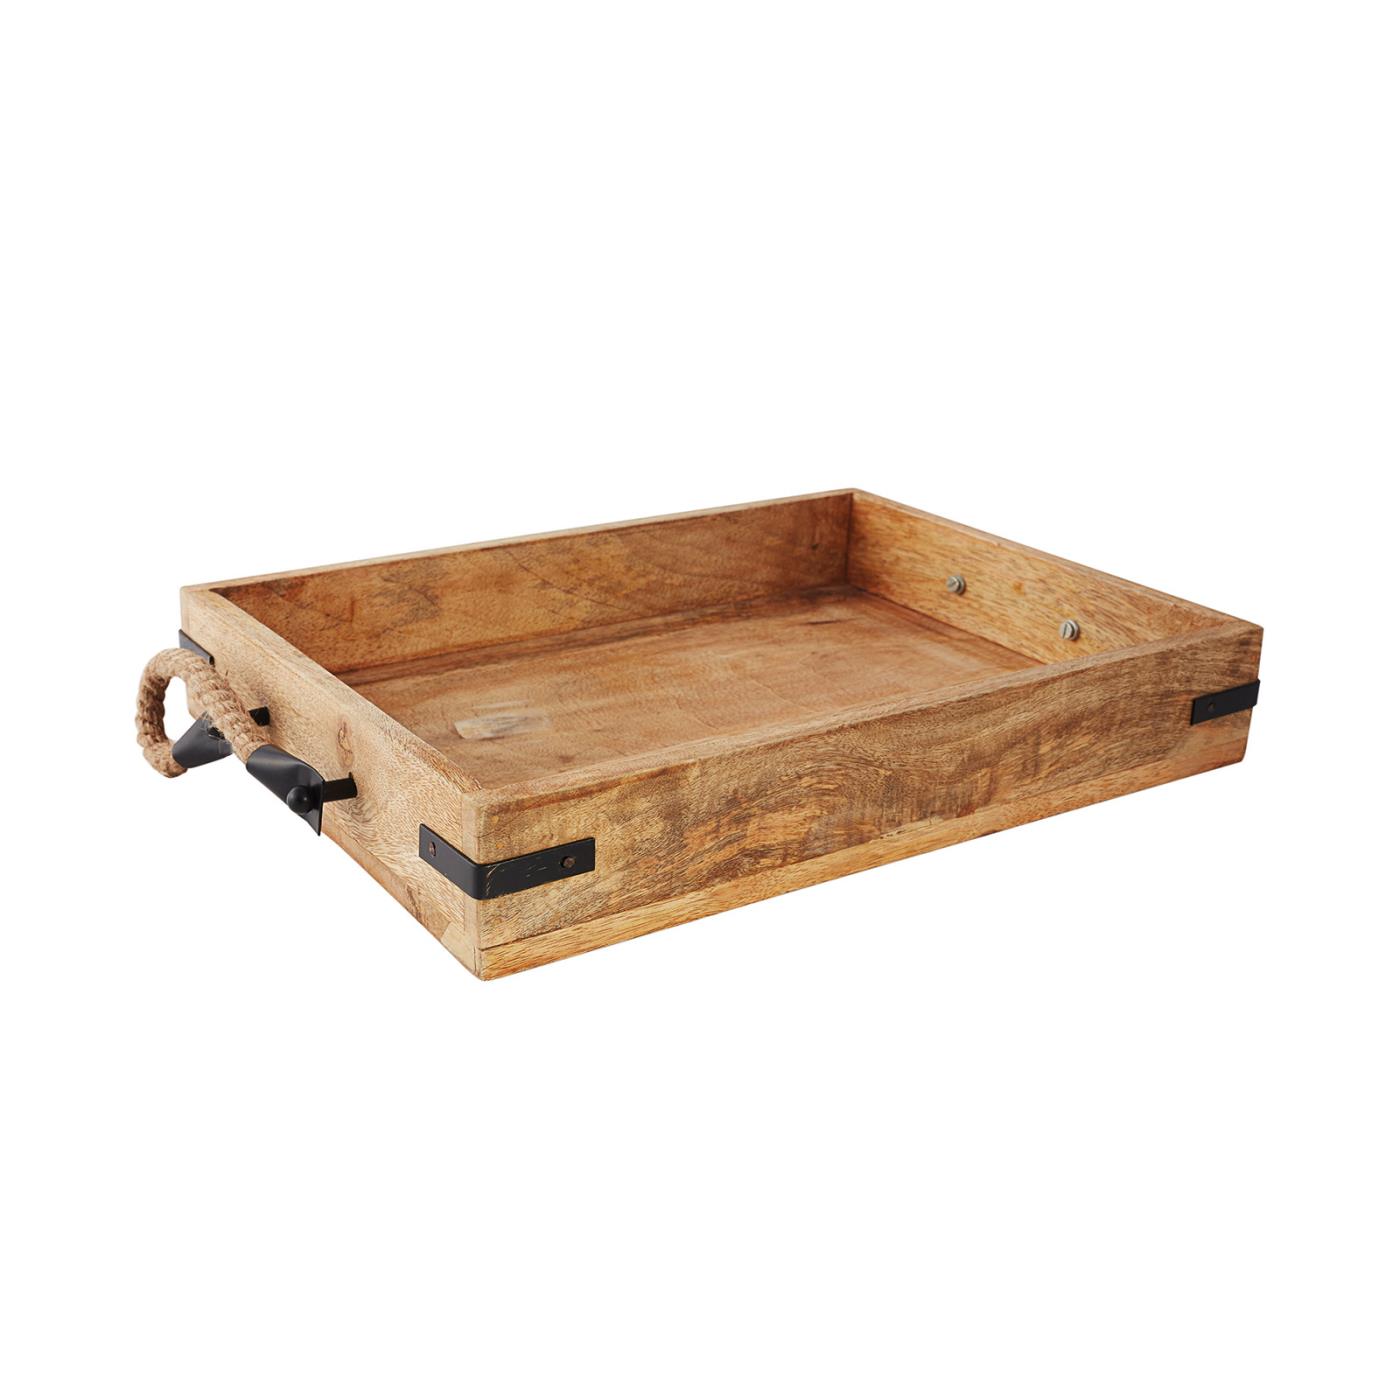 Wood Tray With Rope Handle - 12" x 16"